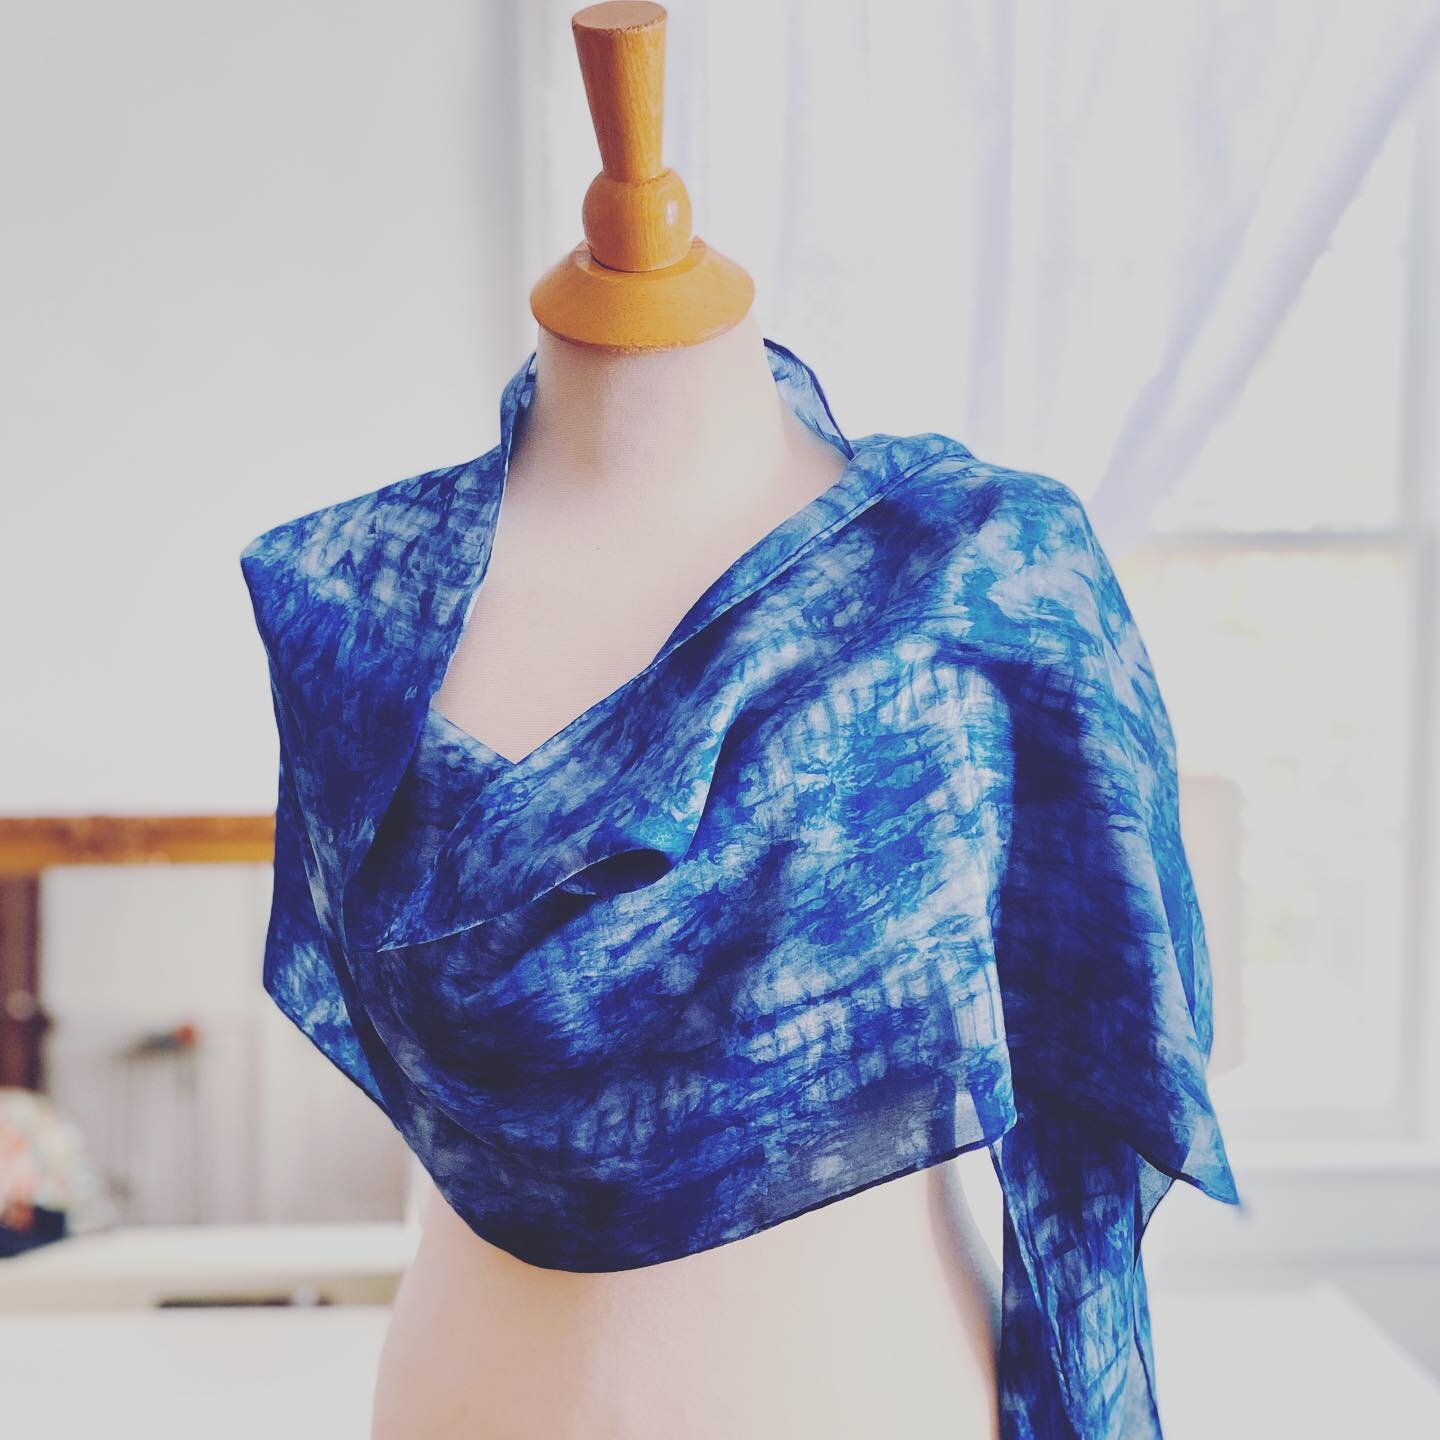 The up-cycle indigo and silk scarf is now on the website. We re-dyed these silk scarves to give them a new life. Take advantage! We have 9 right now at a low price!! 🤩
Link in bio.